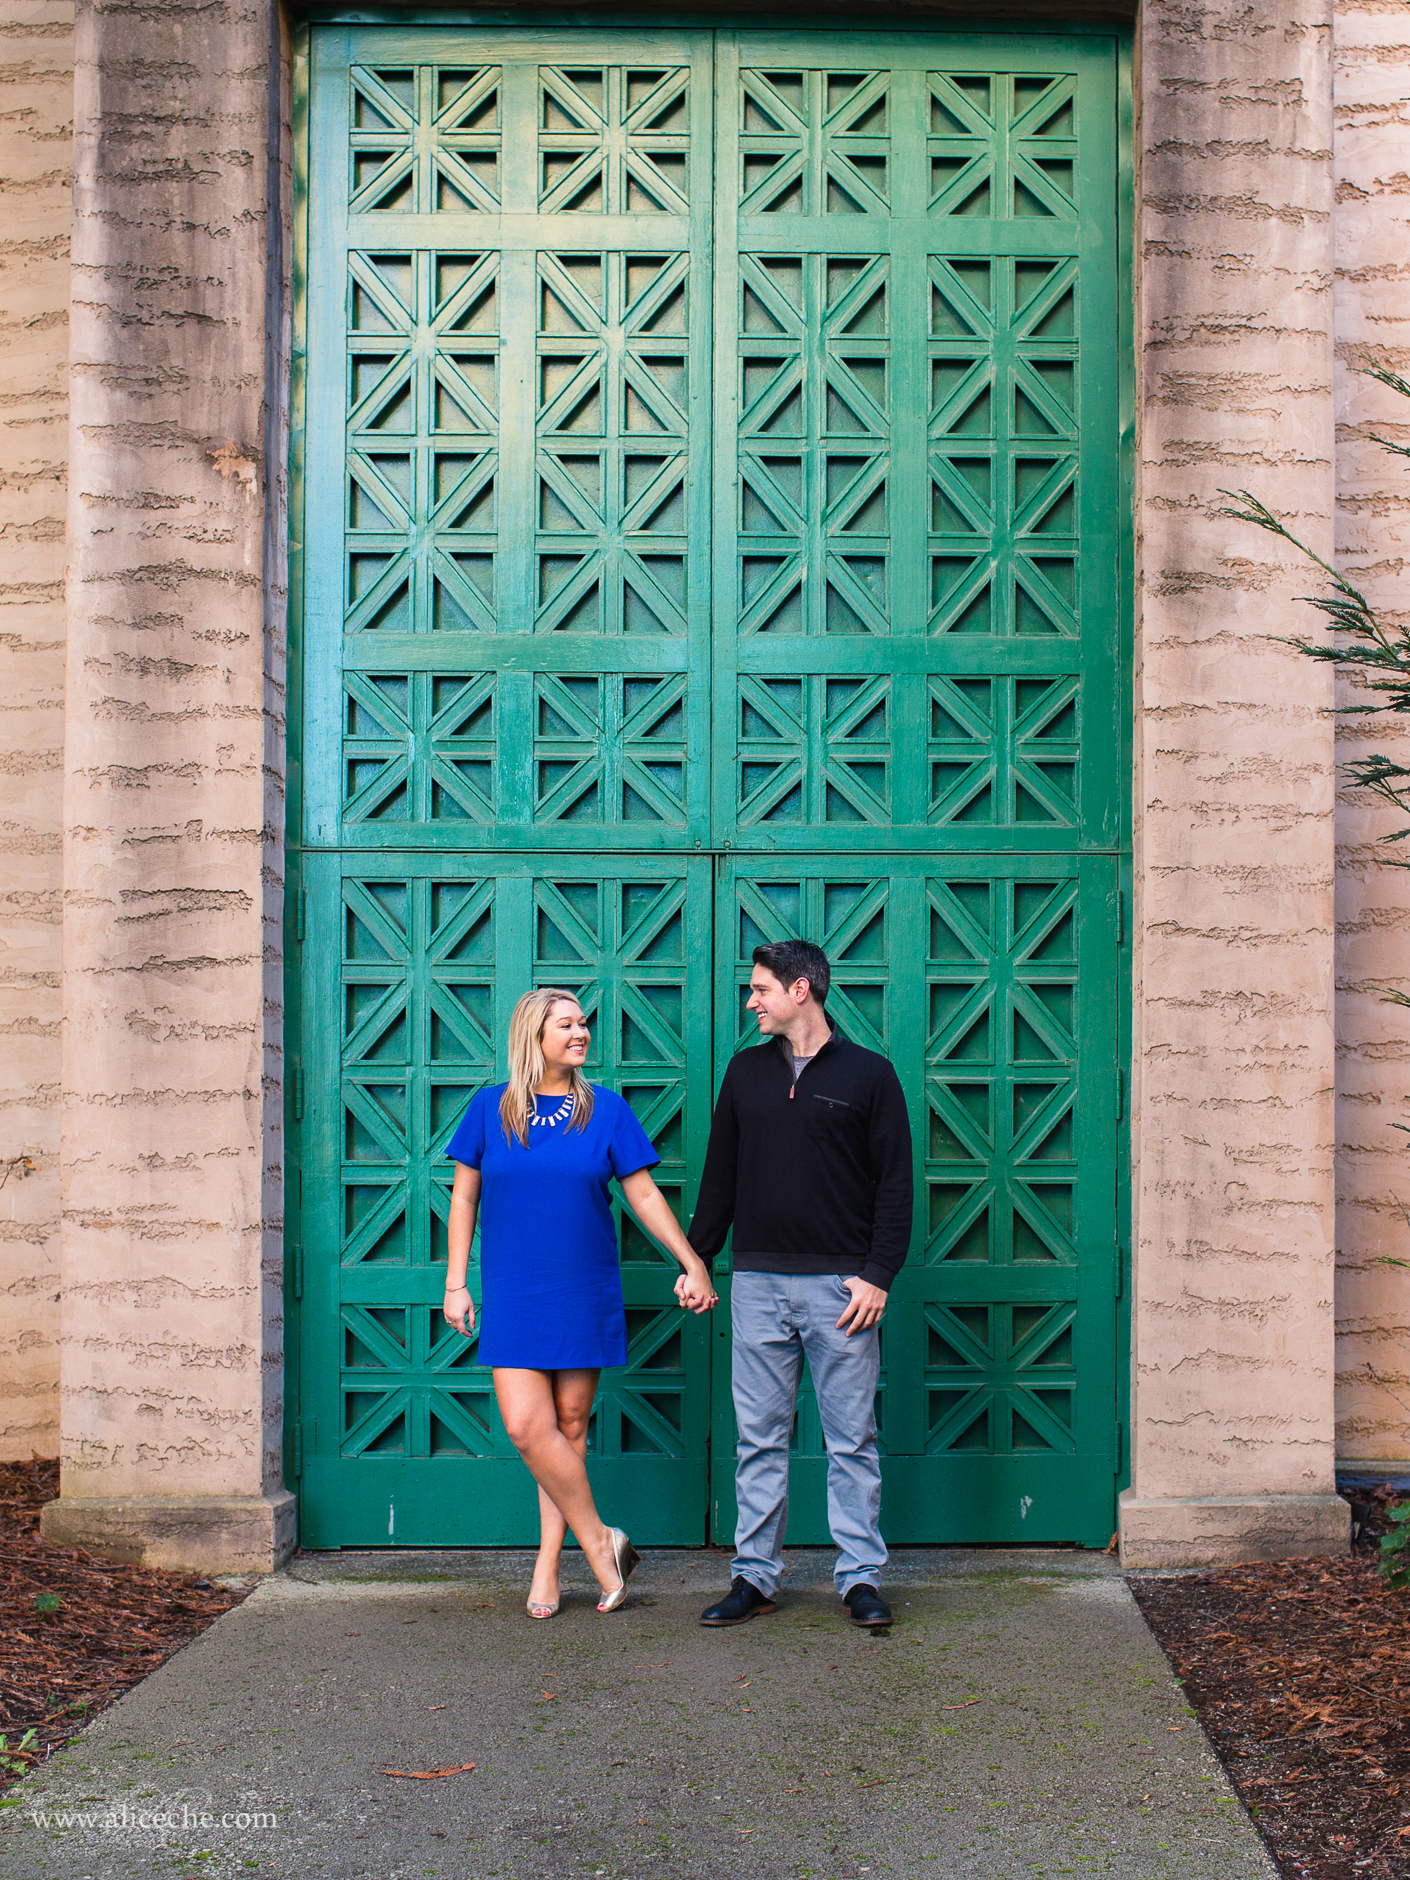 alice-che-photography-san-francisco-engagement-shoot-palace-of-fine-arts-green-door-couple-looking-at-each-other